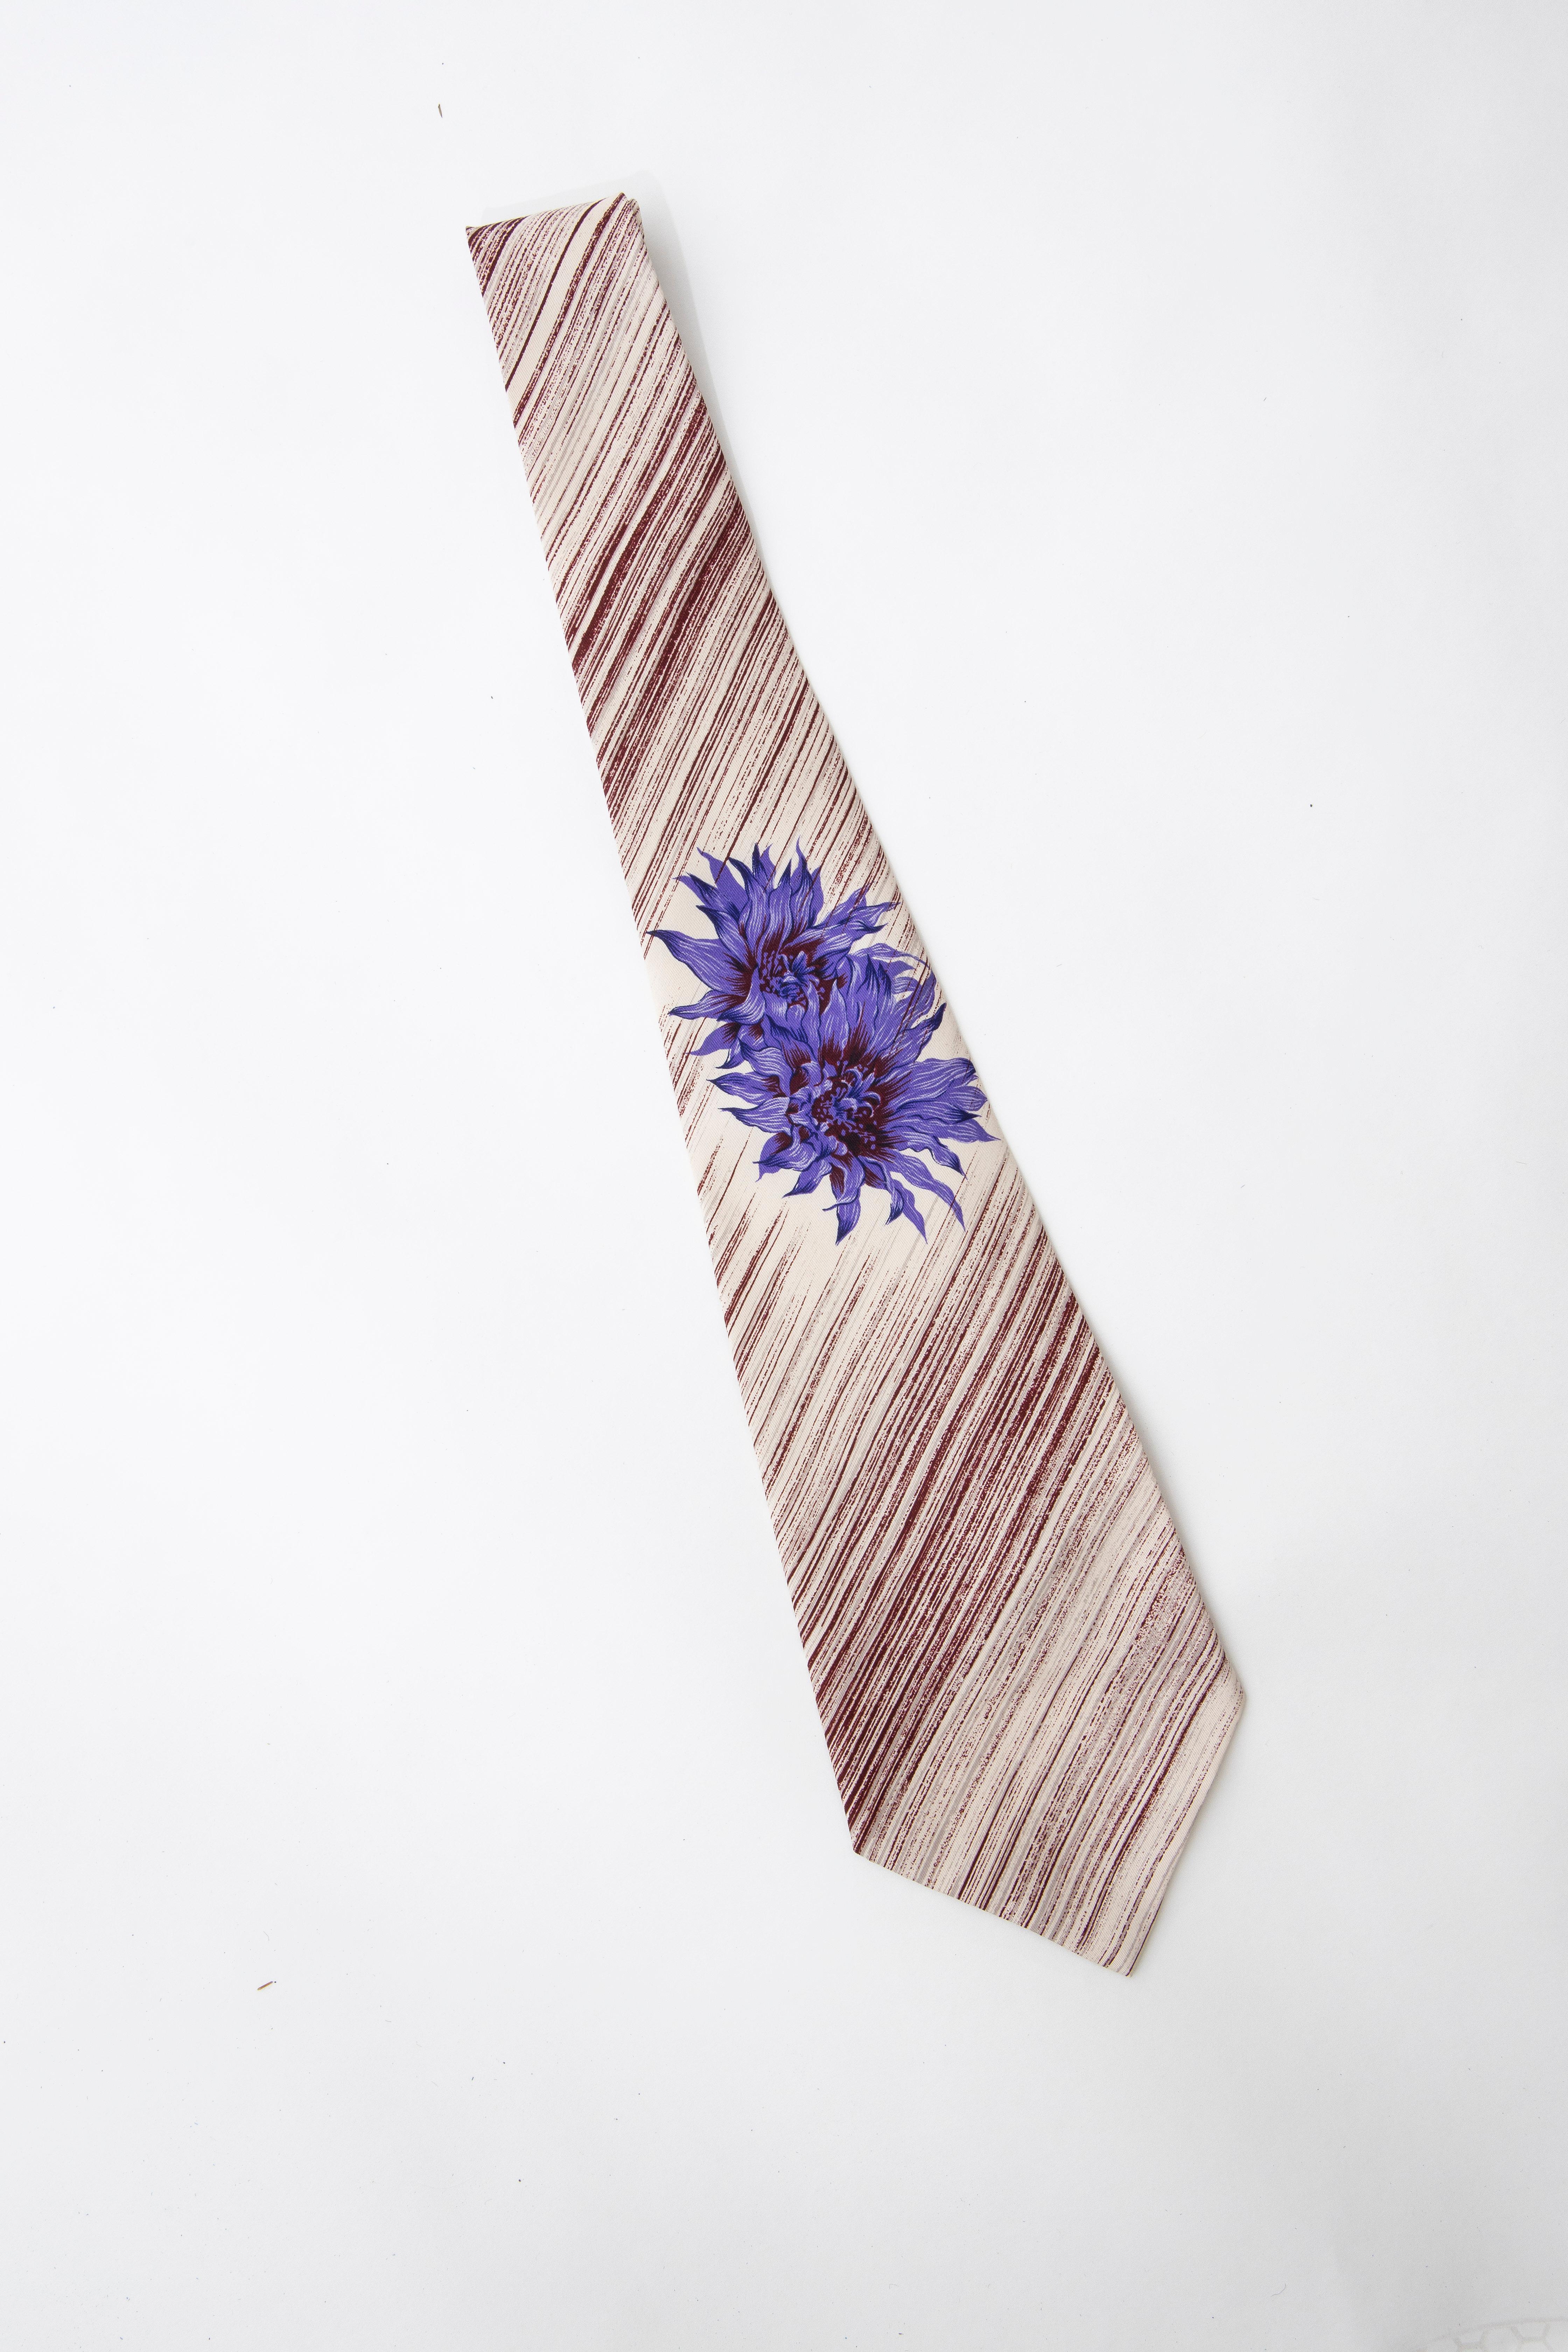 Yohji Yamamoto Pour Homme, Circa: 1980's  silk printed tie with striped and floral pattern throughout. 

Charivari Tags 

Length: 50